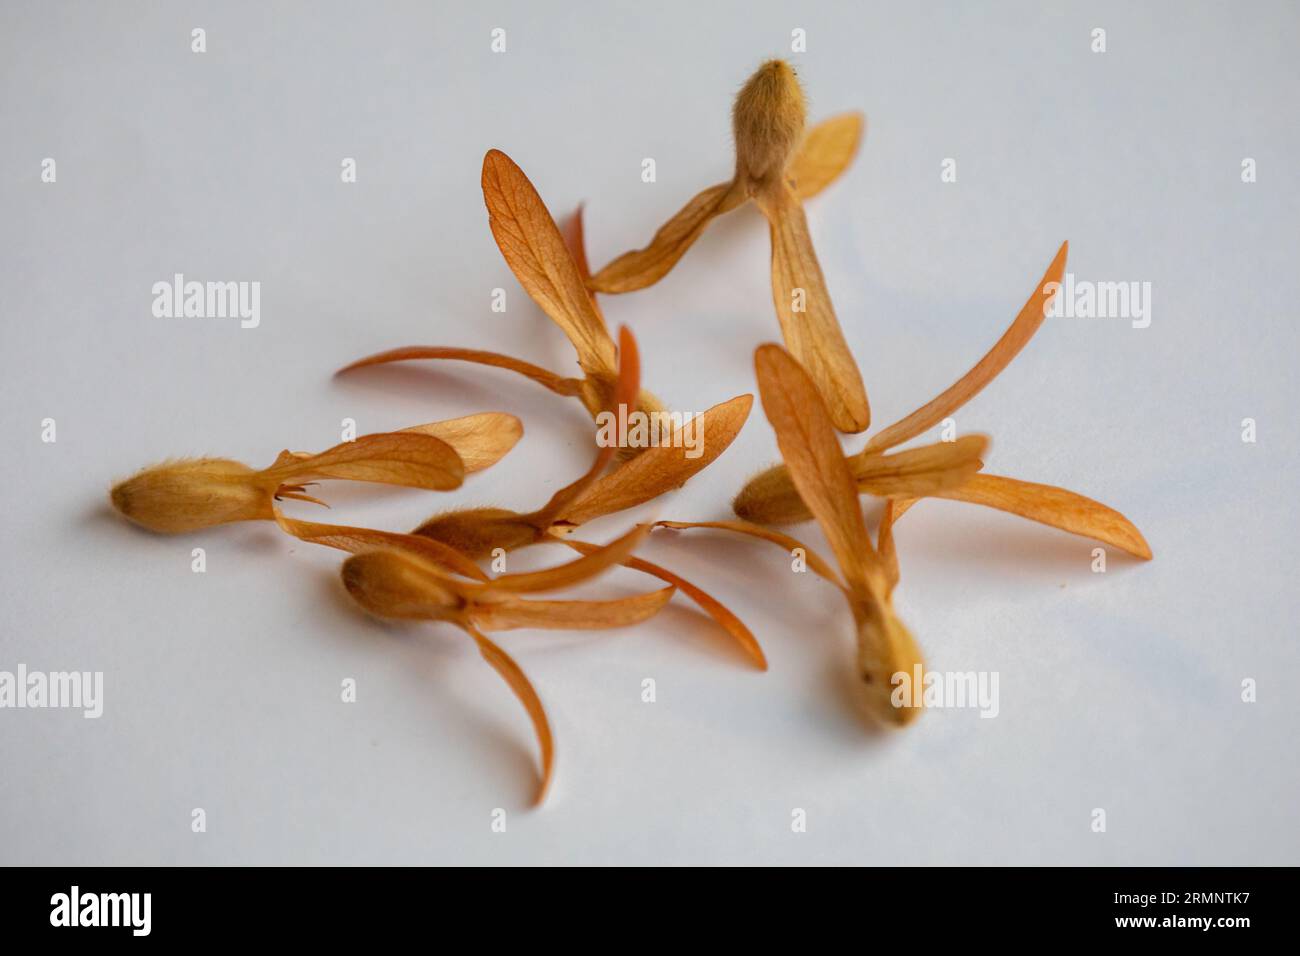 Winged seed of the tree (Tripalis americana or Tripalis gardneriana) known as 'pajeú', 'pau-ant' or 'helicopter tree'. Distribution seeds that fly wit Stock Photo